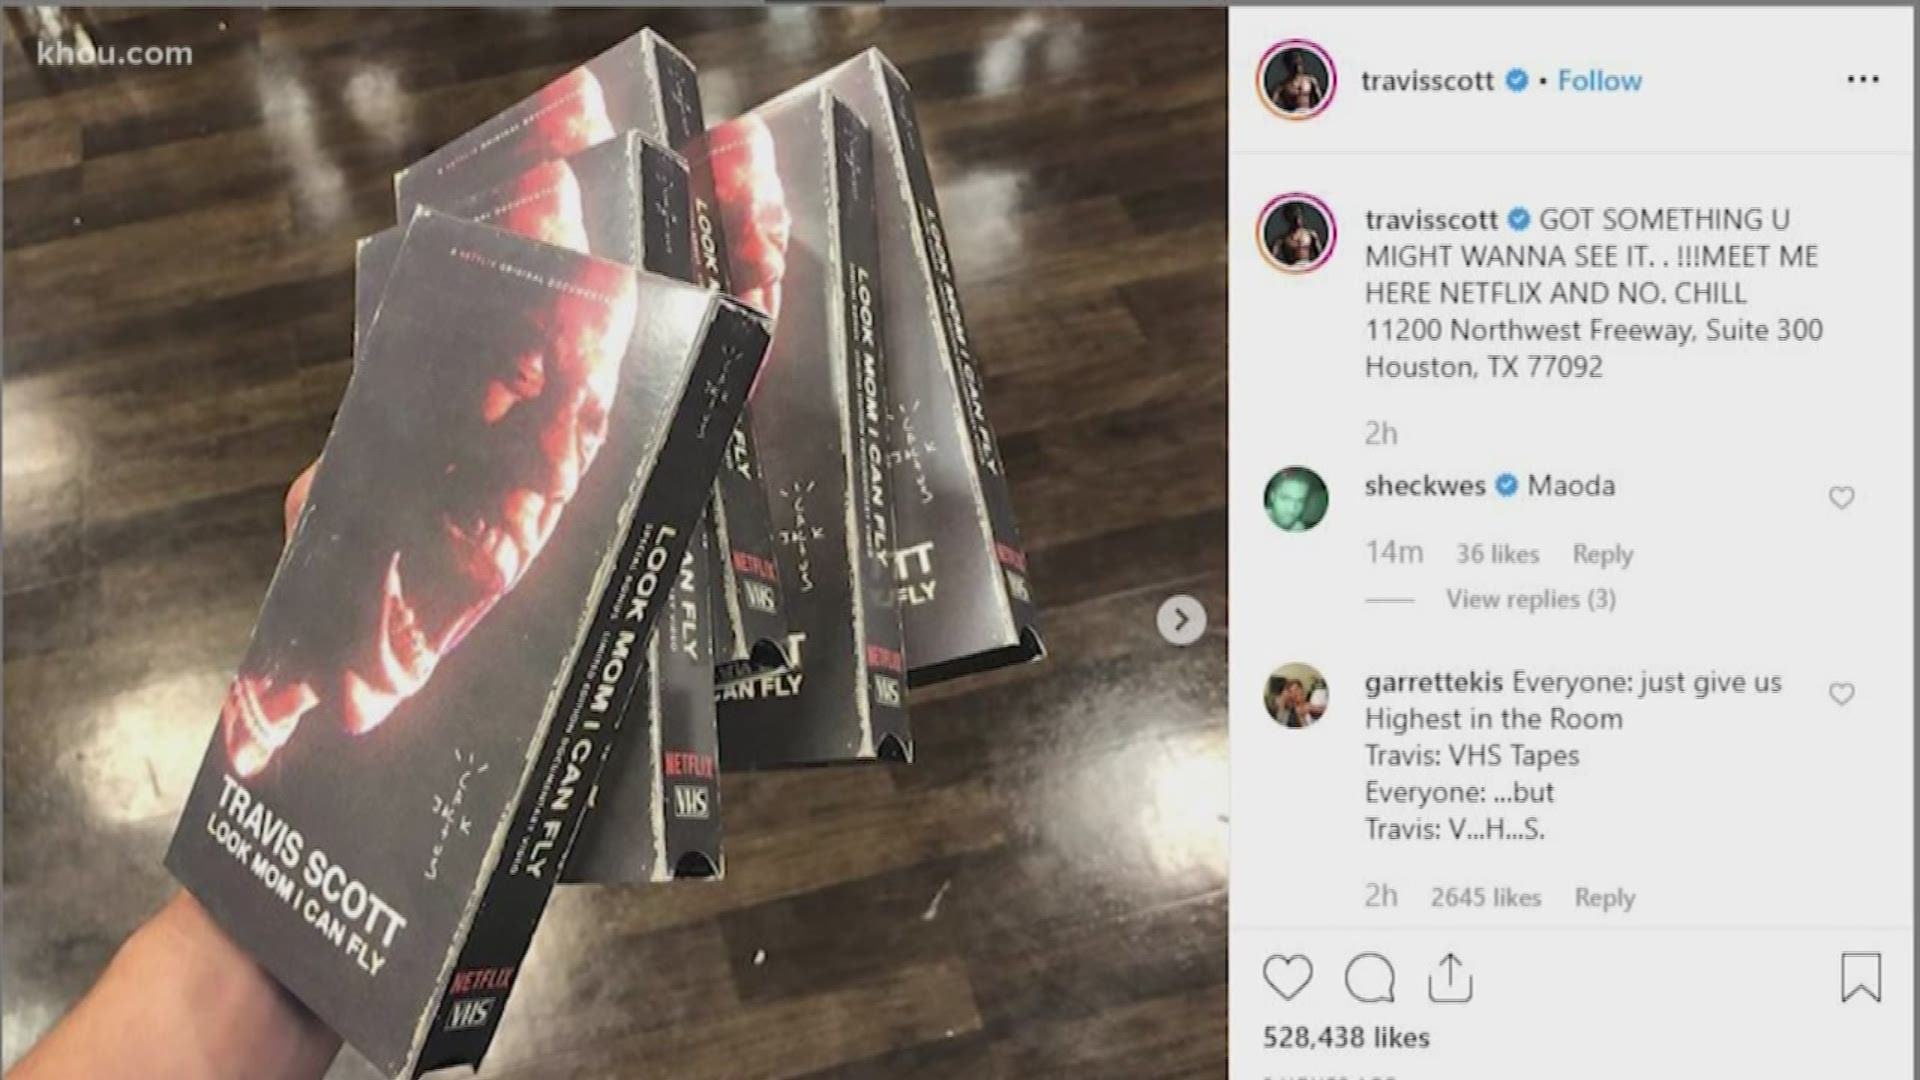 Houston native Travis Scott surprised fans Thursday with a pop-up event at Movie Exchange in northwest Houston. Their prize: VHS copies of a new Netflix documentary. That's right. VHS copies.